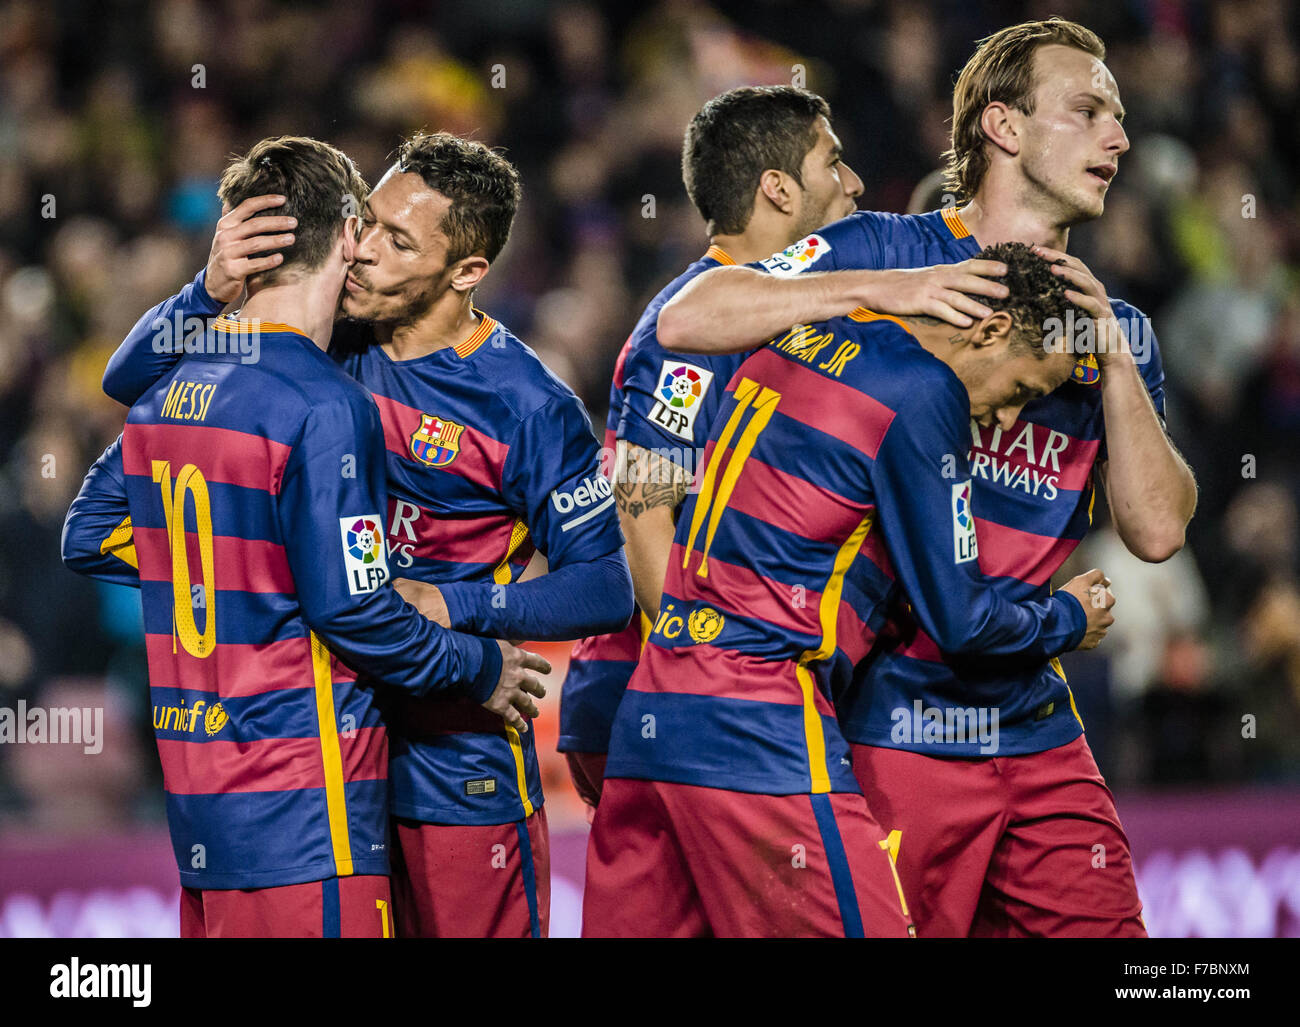 Barcelona, Catalonia, Spain. 28th Nov, 2015. FC Barcelona's forward MESSI celebrates his goal with teammates during the league match against Real Sociedad at the Camp Nou stadium in Barcelonas Credit:  Matthias Oesterle/ZUMA Wire/Alamy Live News Stock Photo